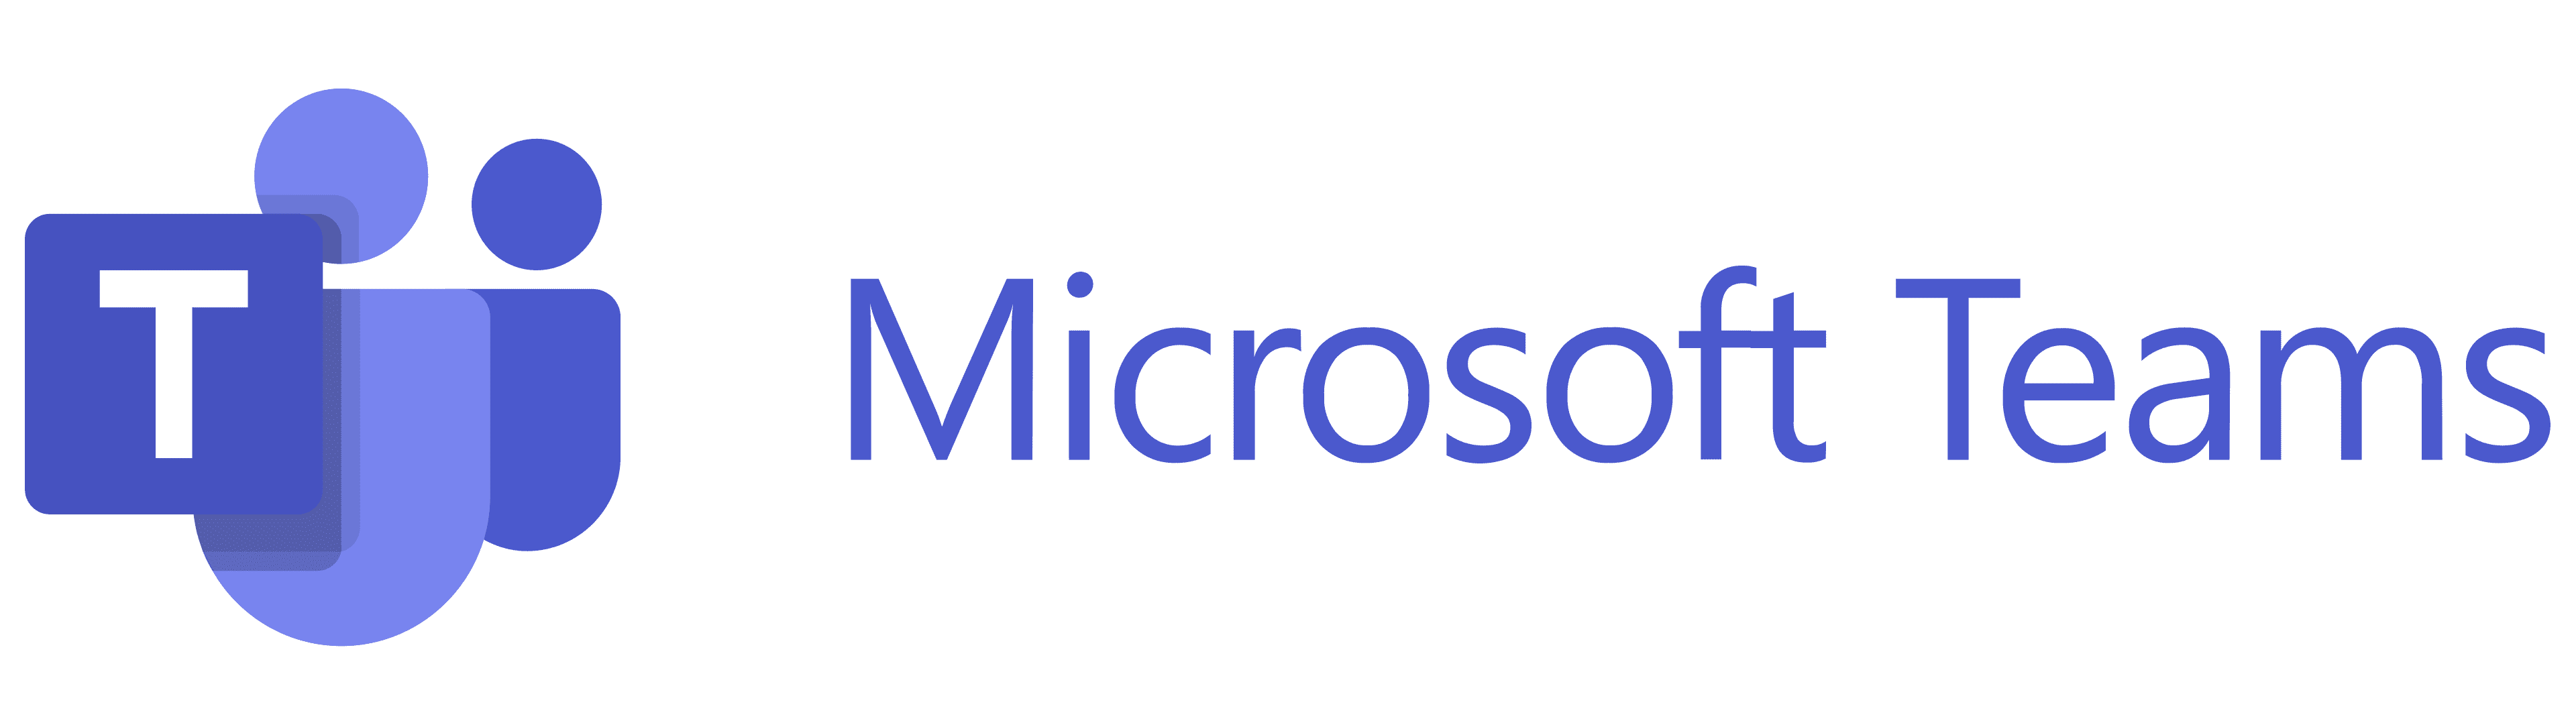 Guide to Microsoft Teams